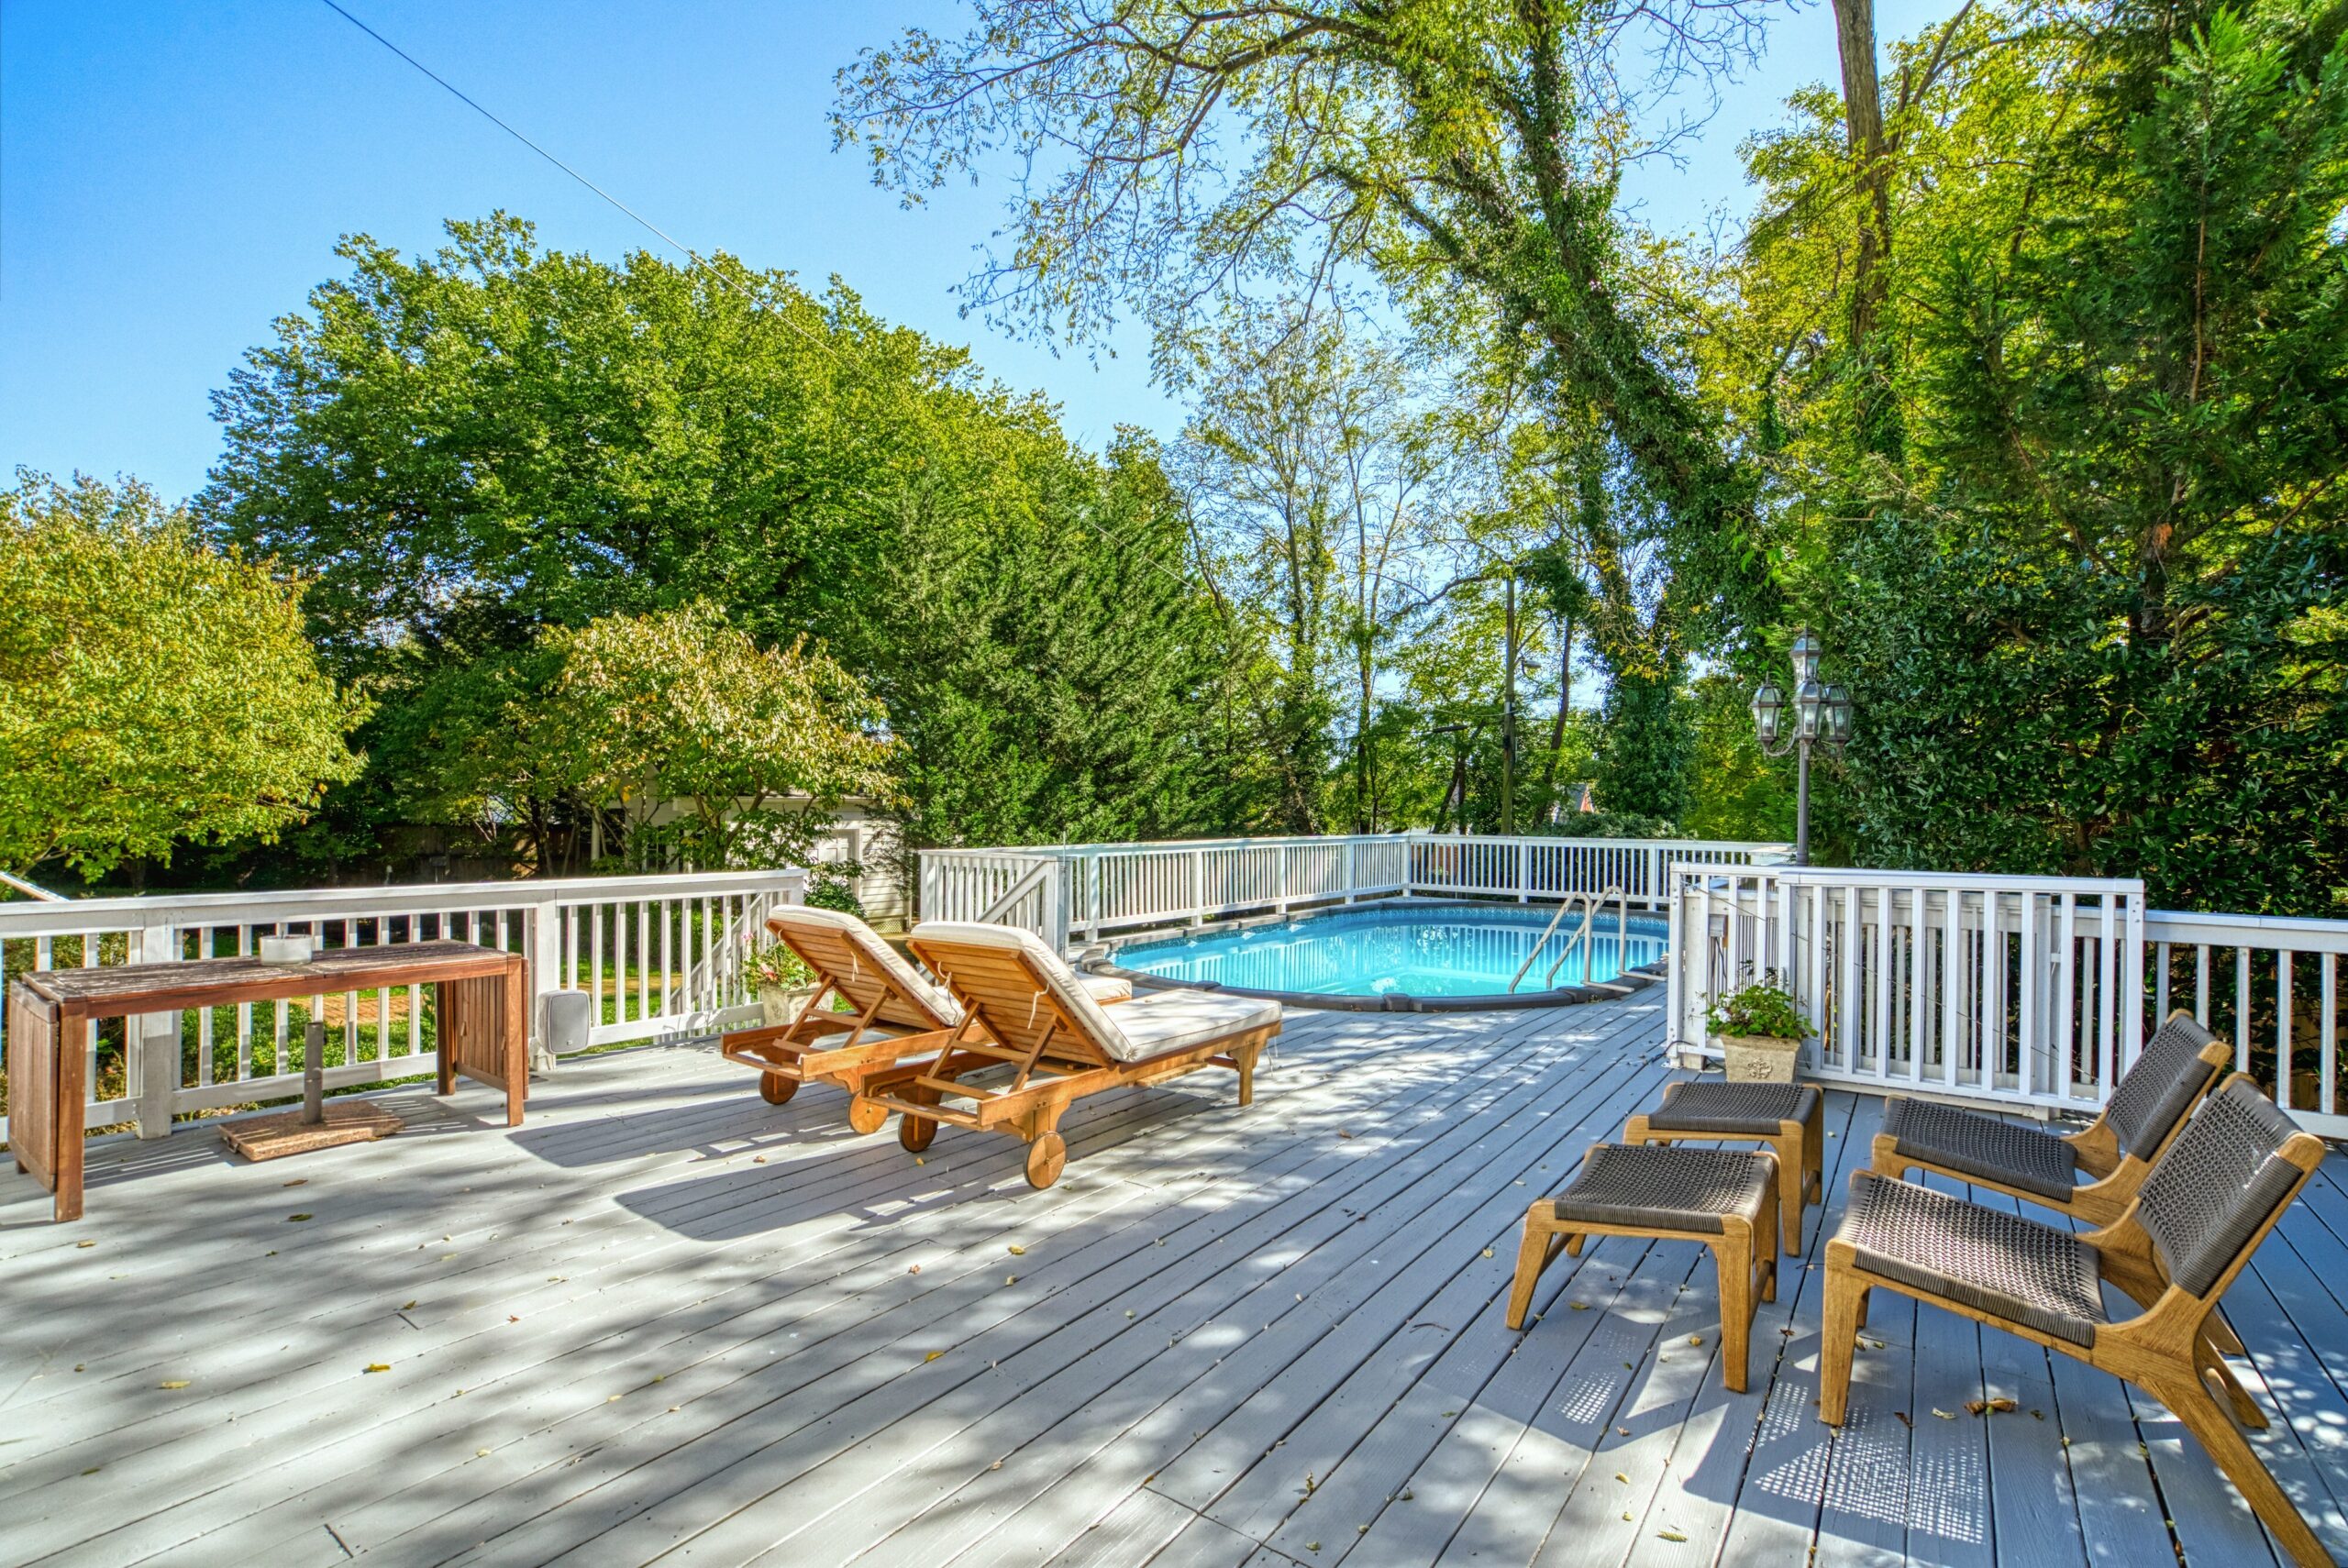 Exterior professional photo of 1826 Varnum St NW - showing the pool deck with lounge chairs and the pool in the background